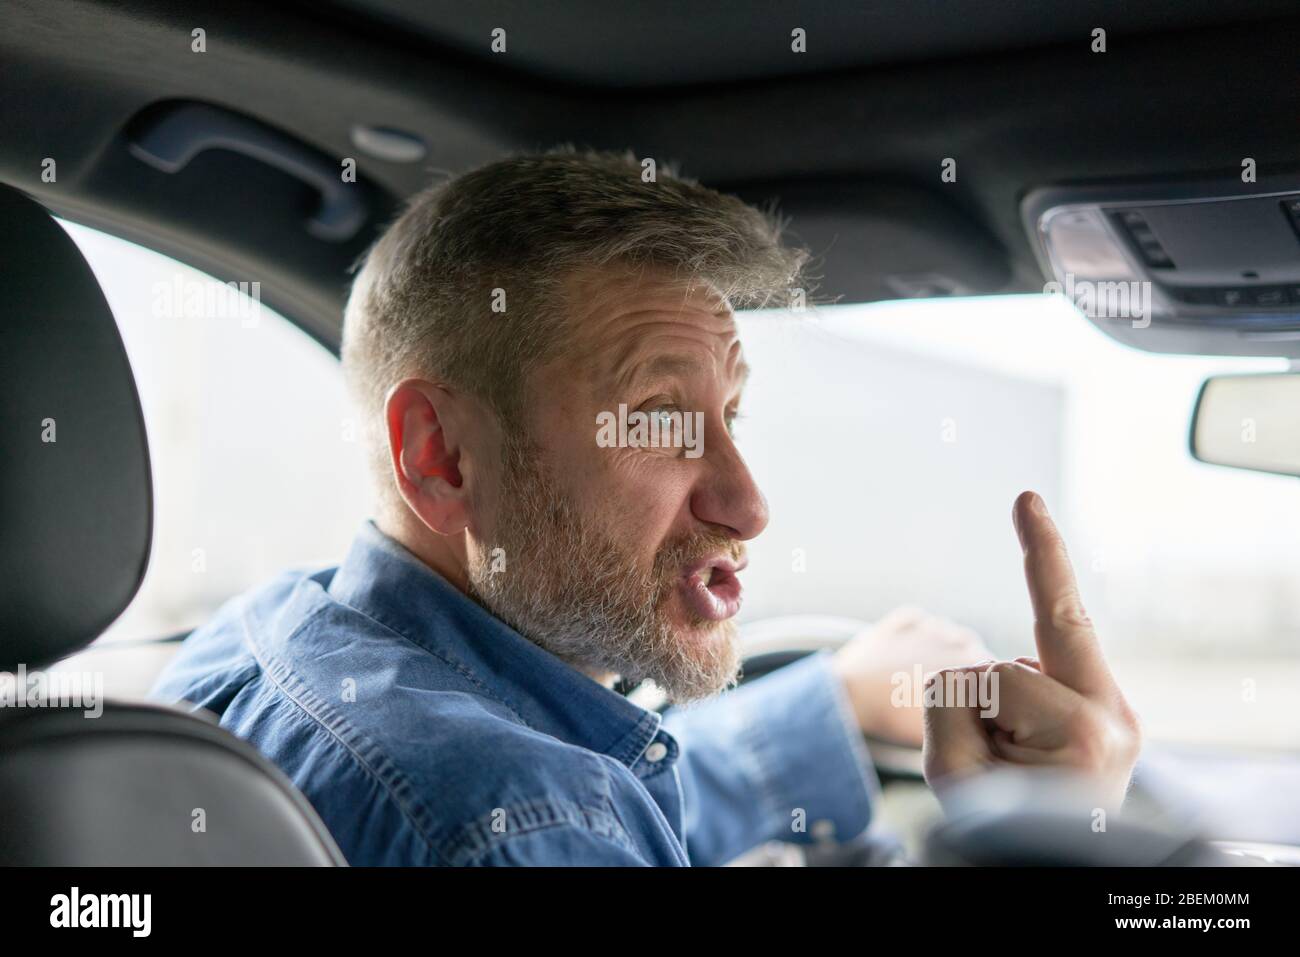 unfriendly aggressive car driver showing the middle finger Stock Photo